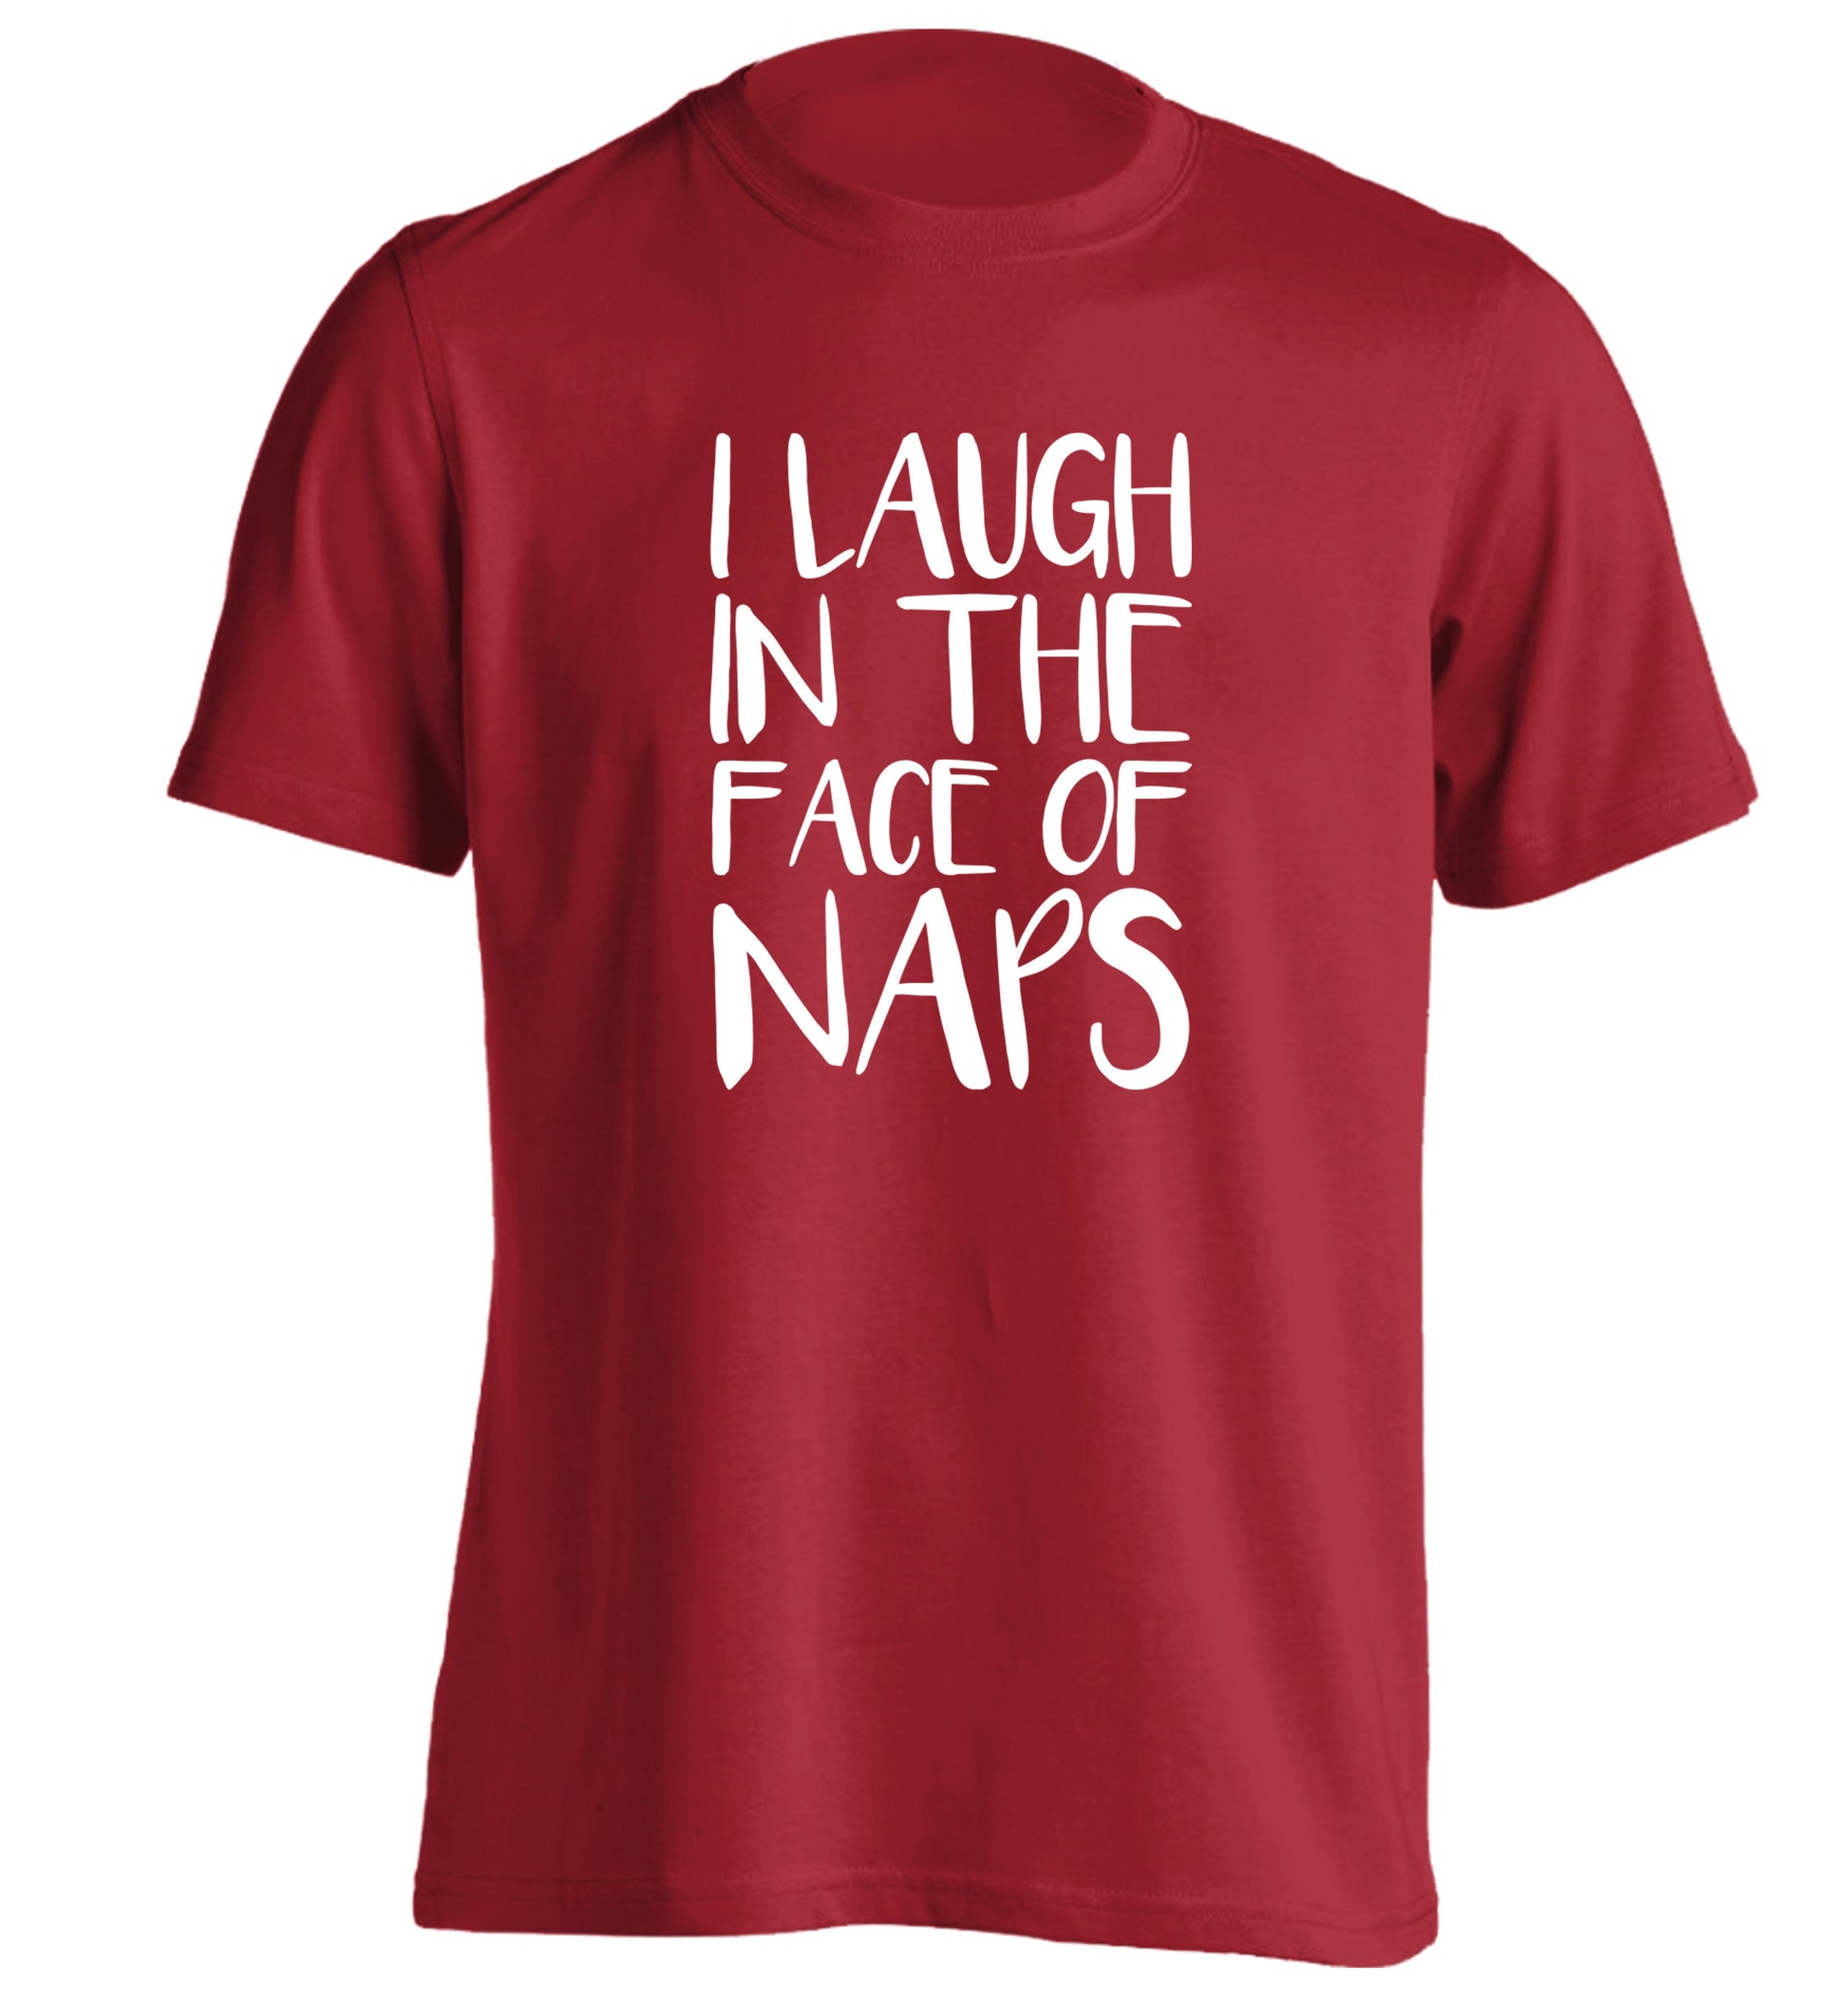 I laugh in the face of naps adults unisex red Tshirt 2XL